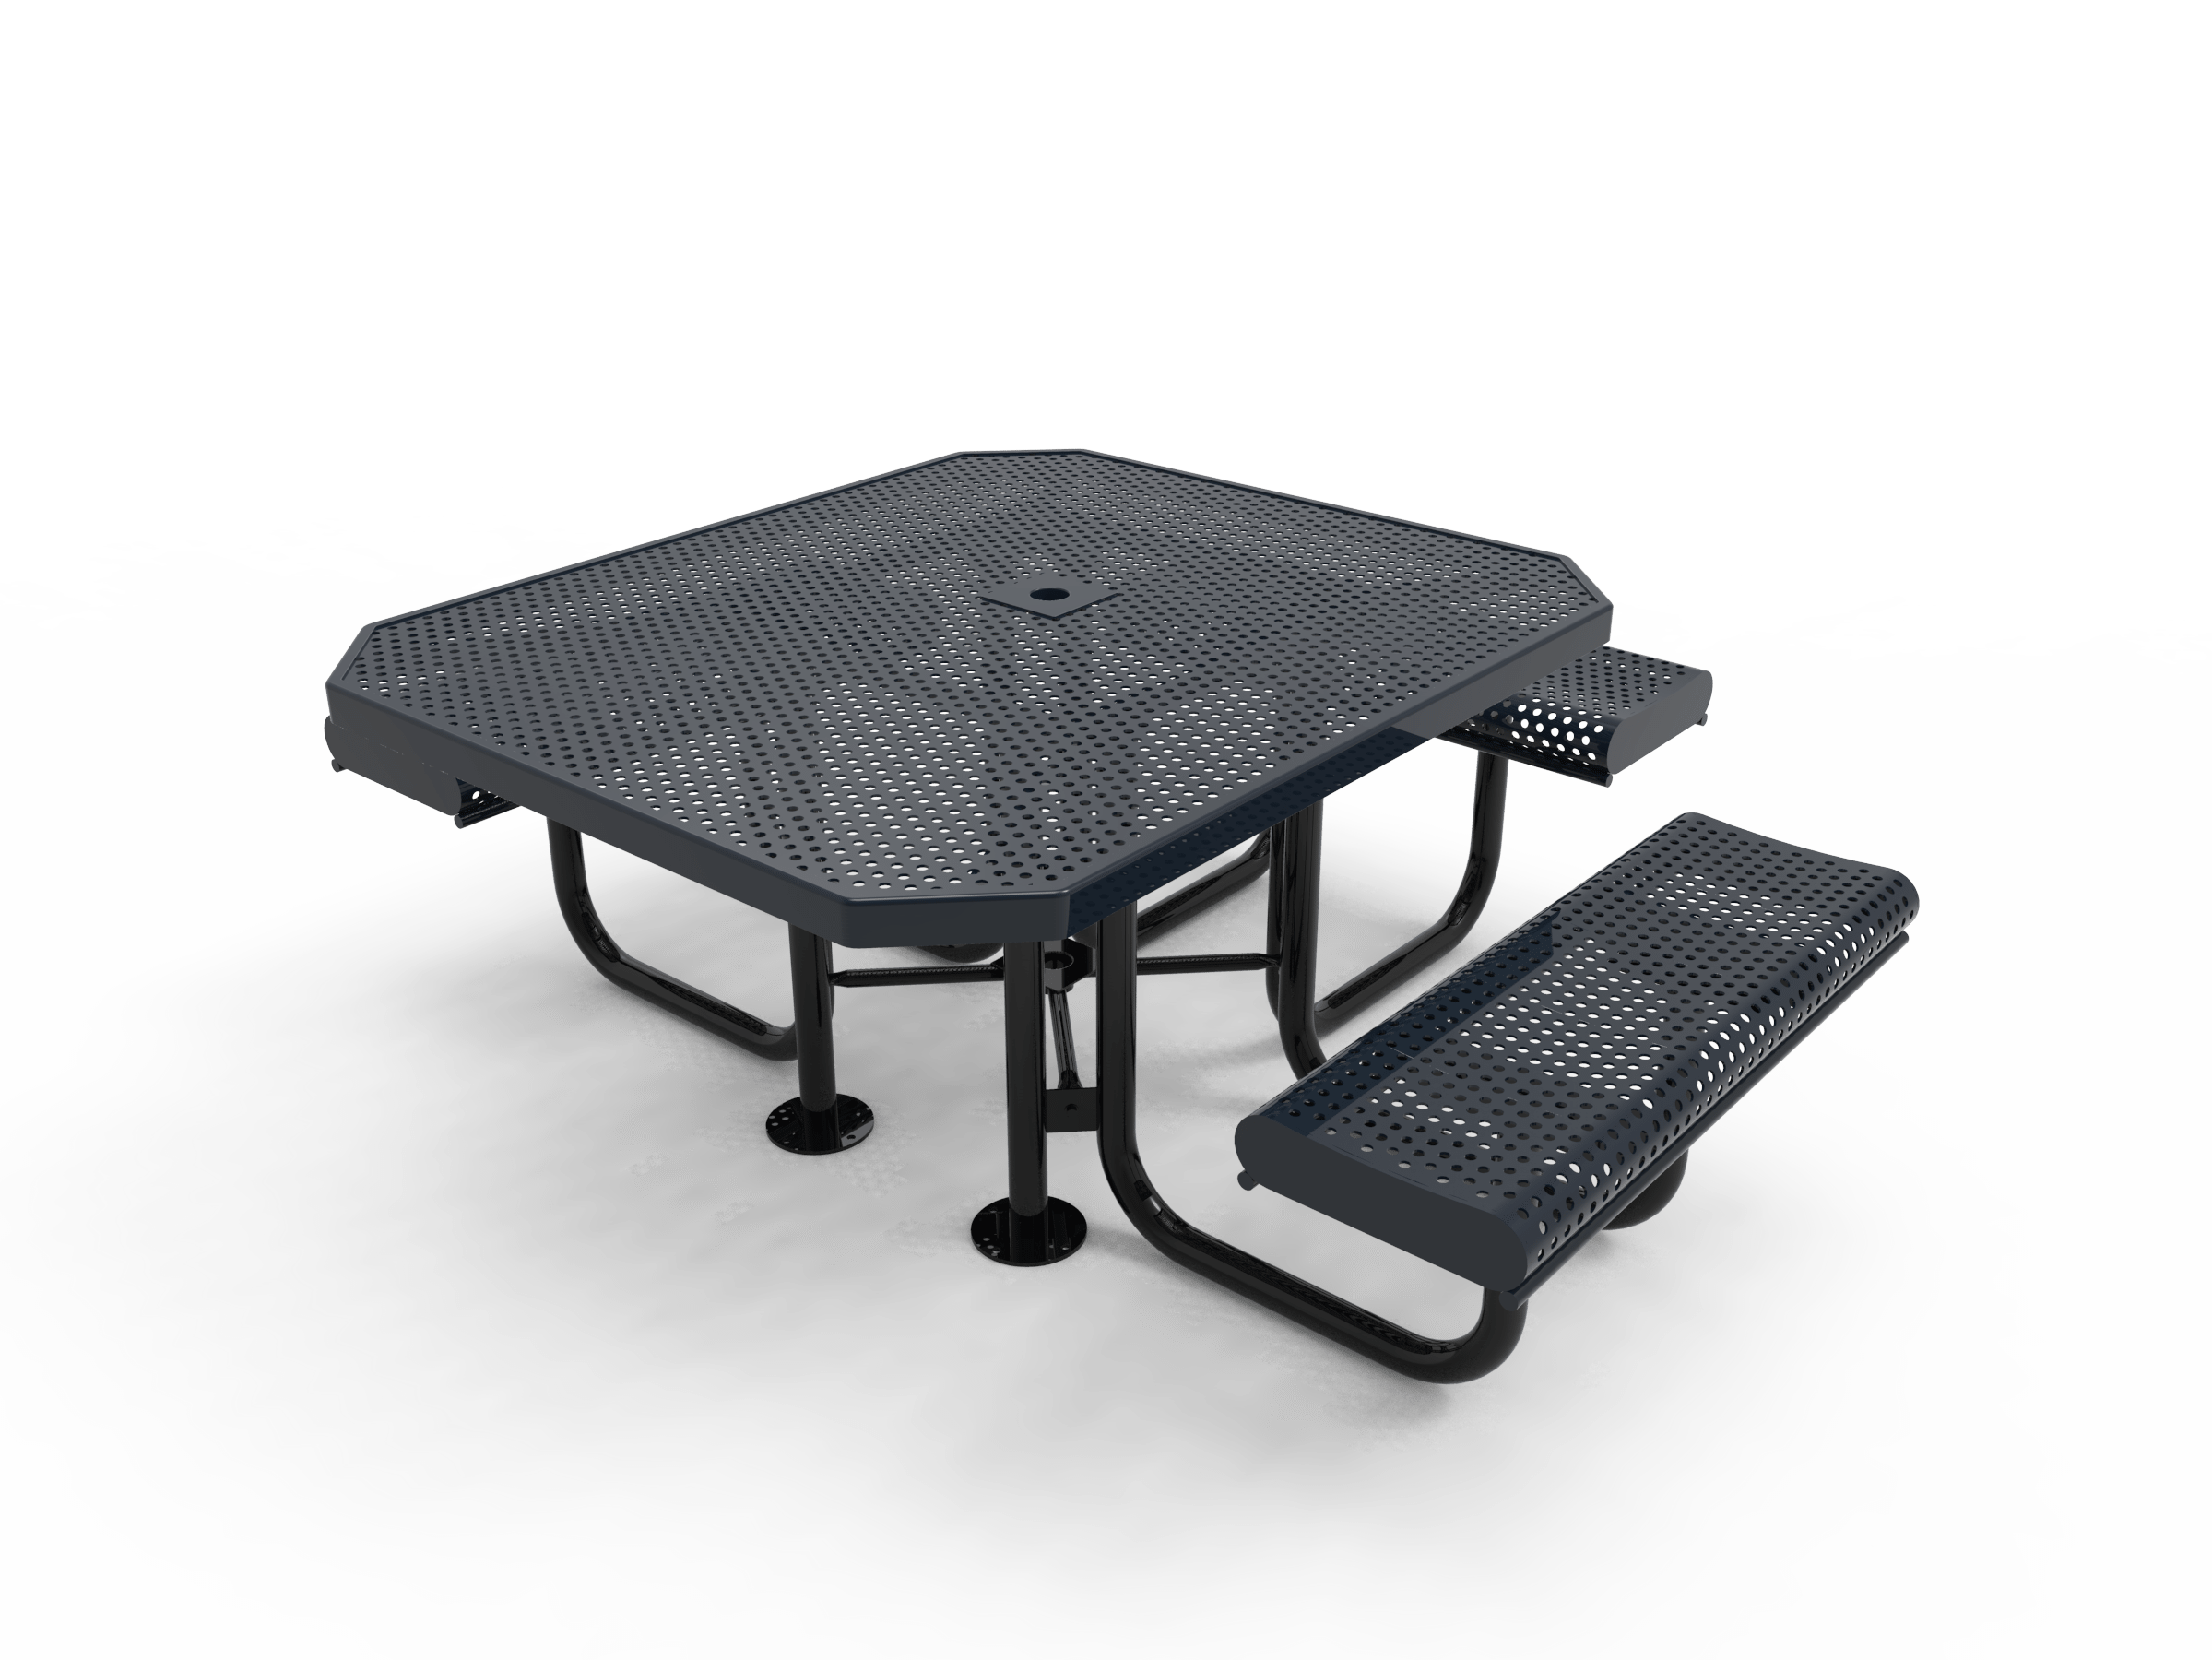 46″ Oct Picnic Table 3 Rolled Seats-Punched
TOR46-D-04-013
Industry Standard Finish
$1689.00
TOR46-B-04-013
Advantage Premium Finish
$2019.00
